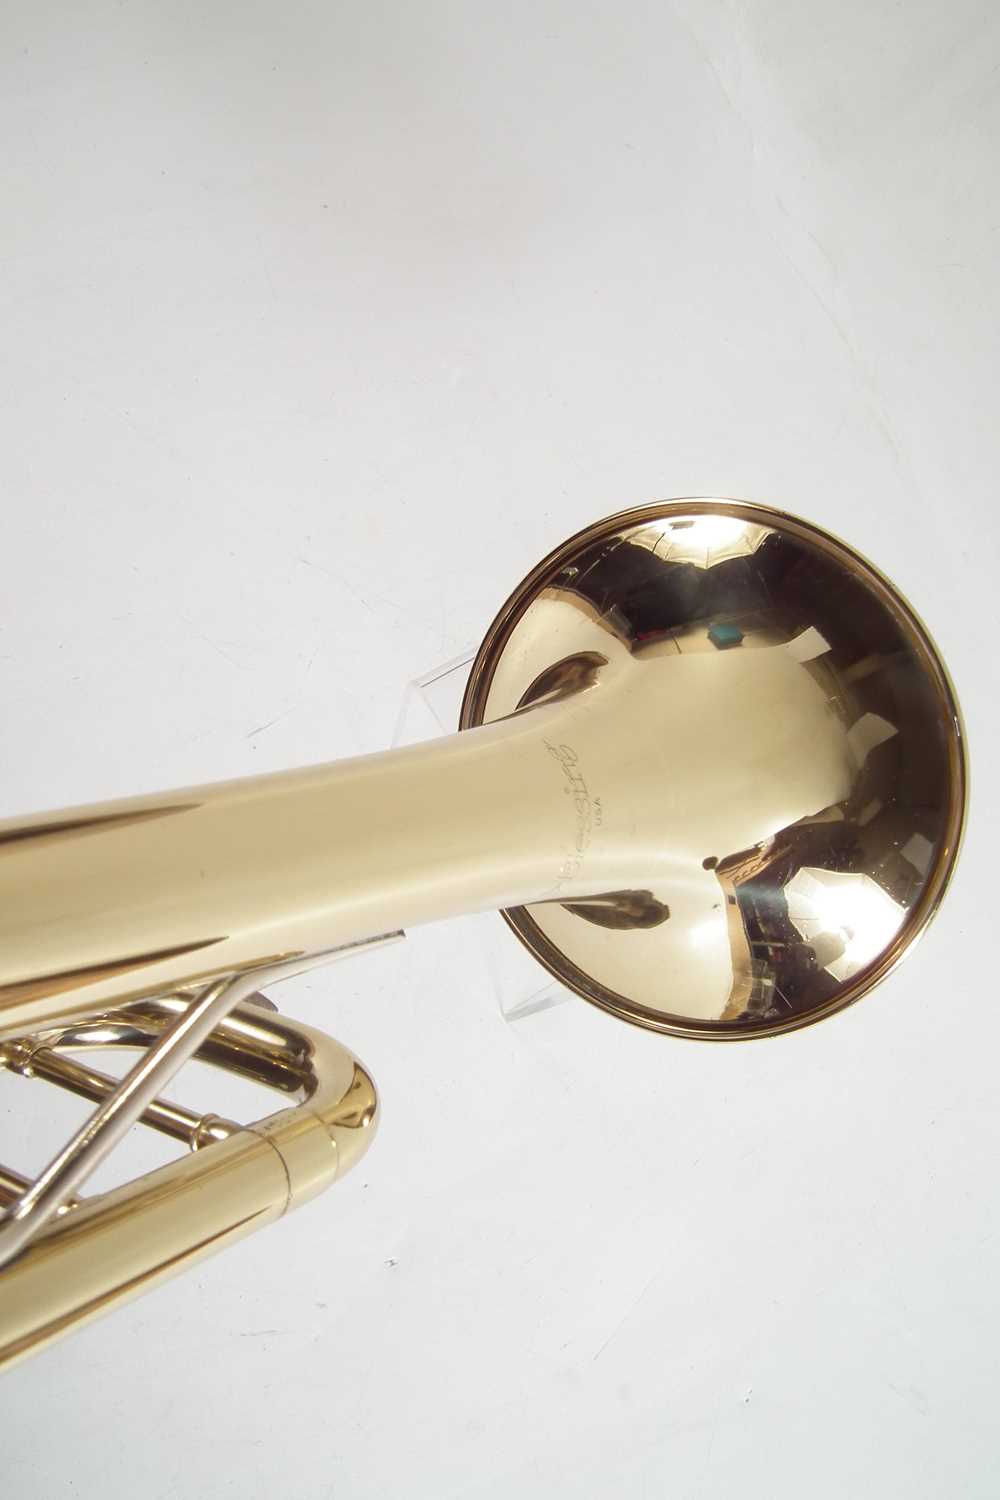 Blessing trumpet, - Image 6 of 8